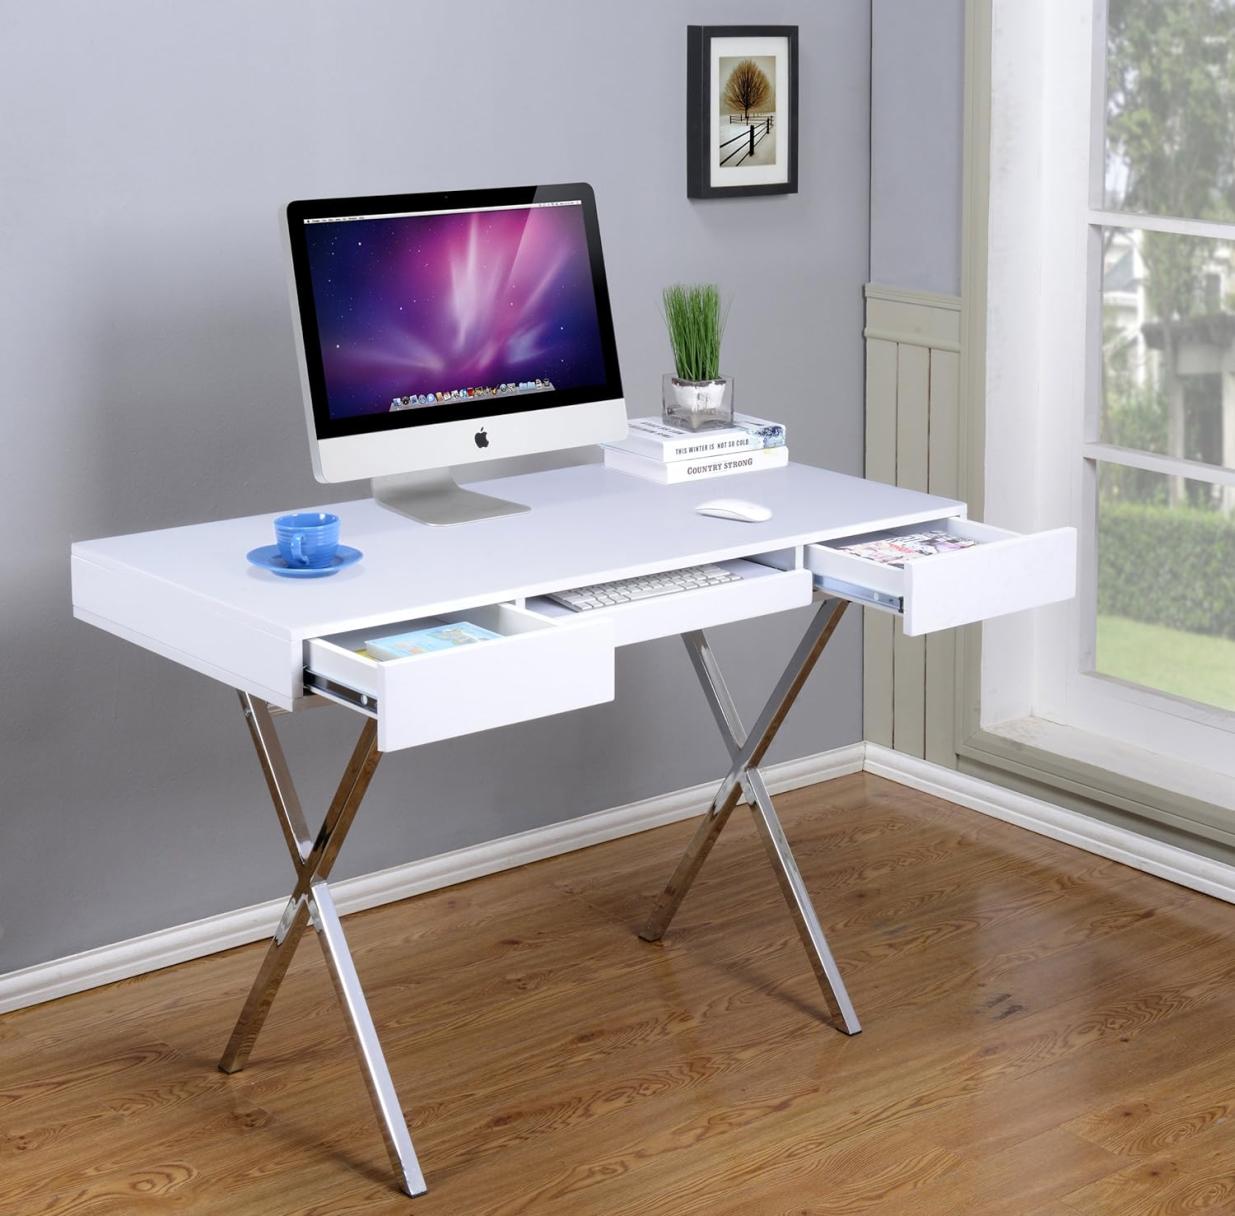 What Are the Latest Trends in Standing Desks?